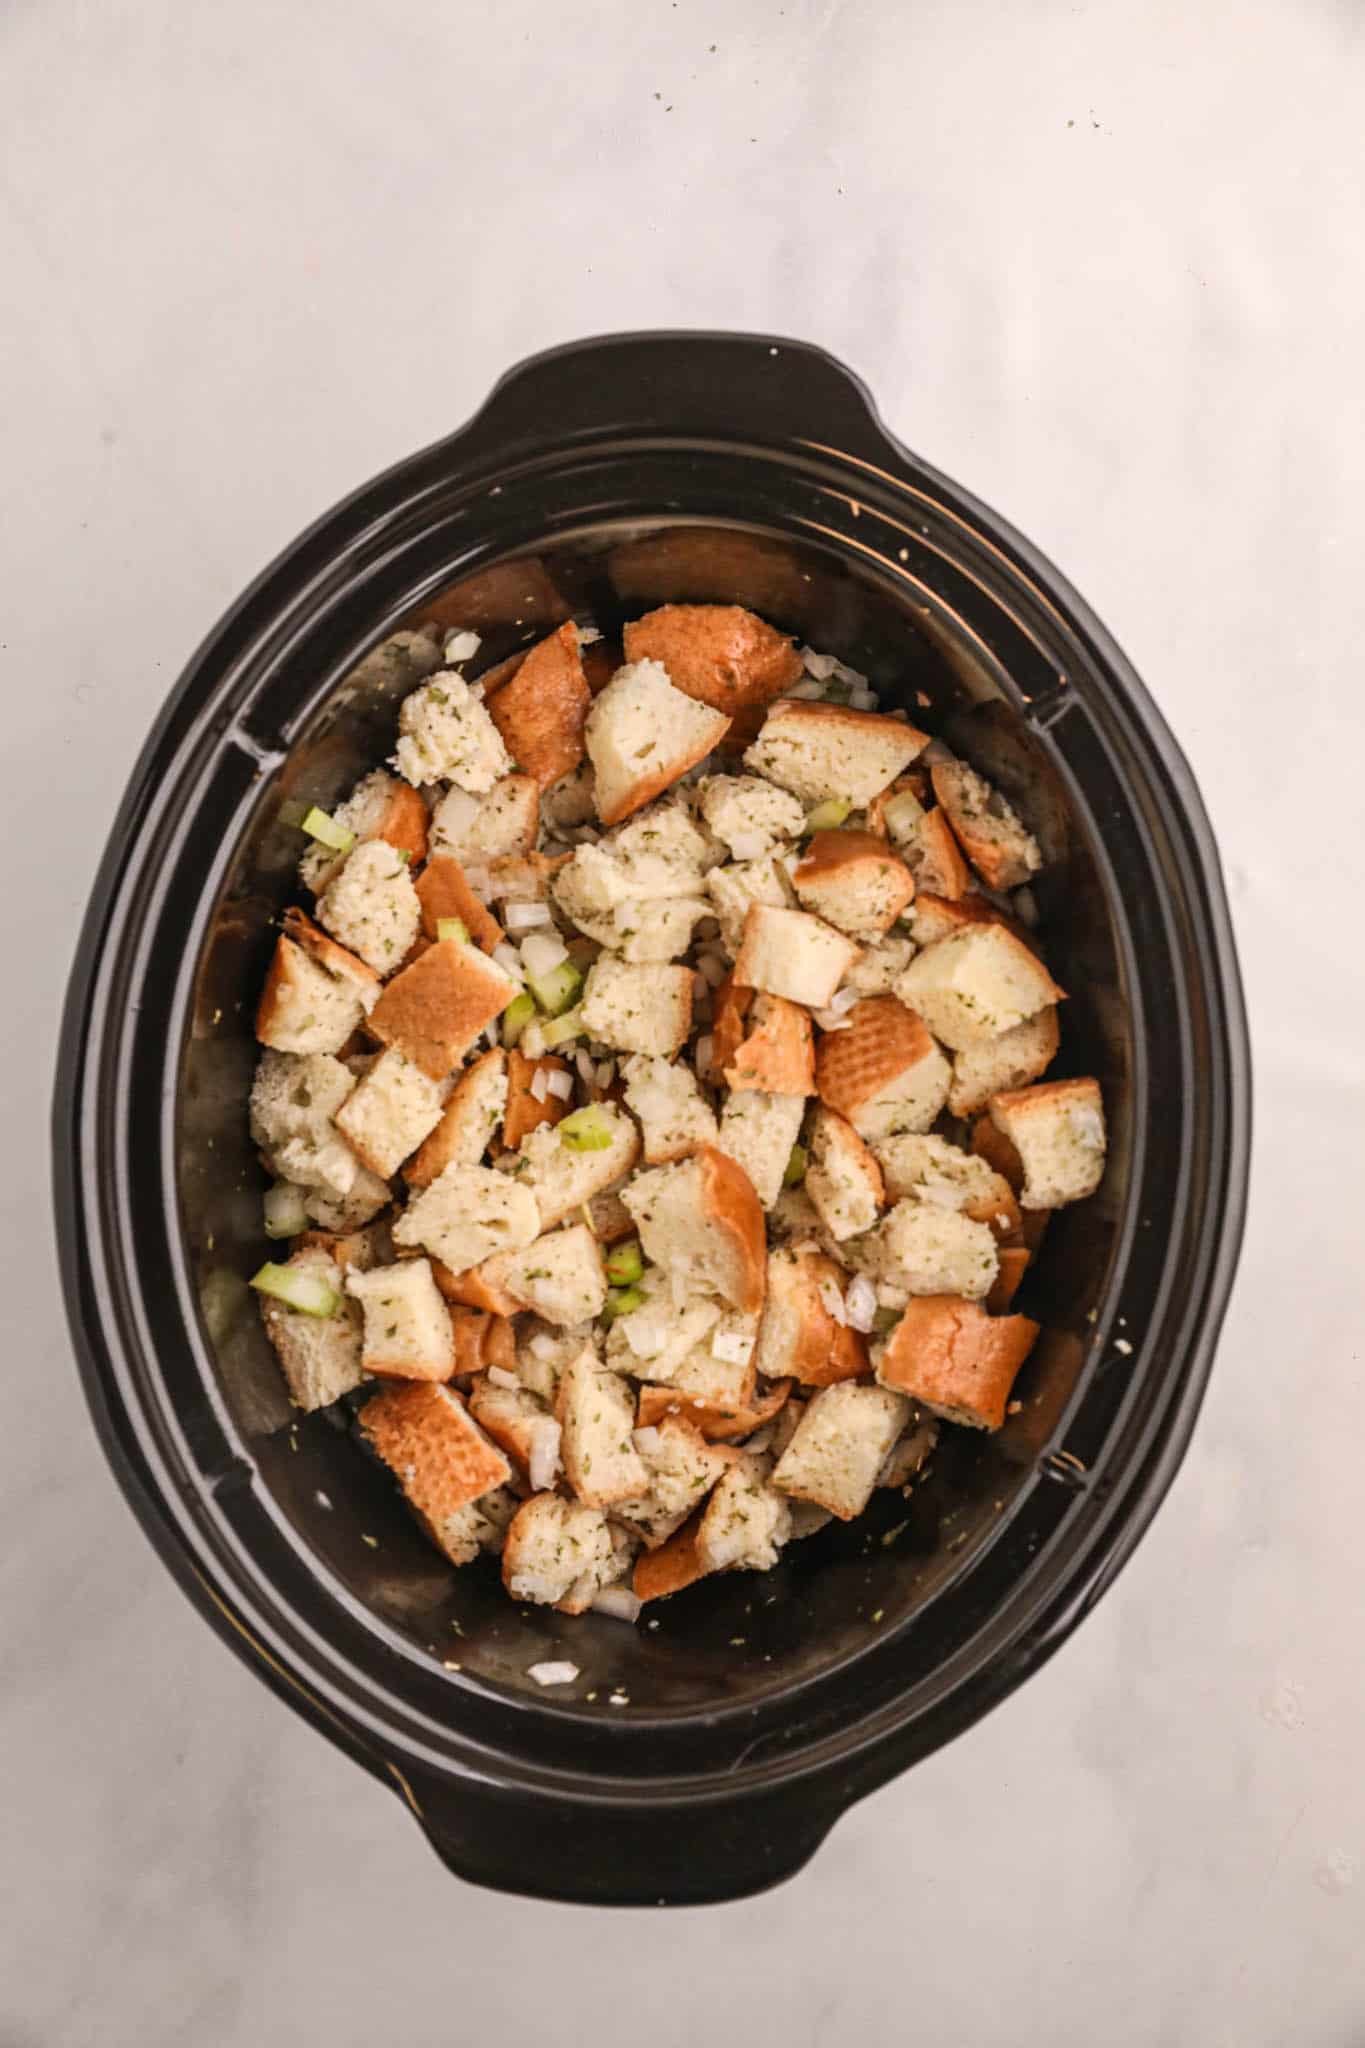 bread cubes stirred with melted butter and chopped veggies in a crock pot